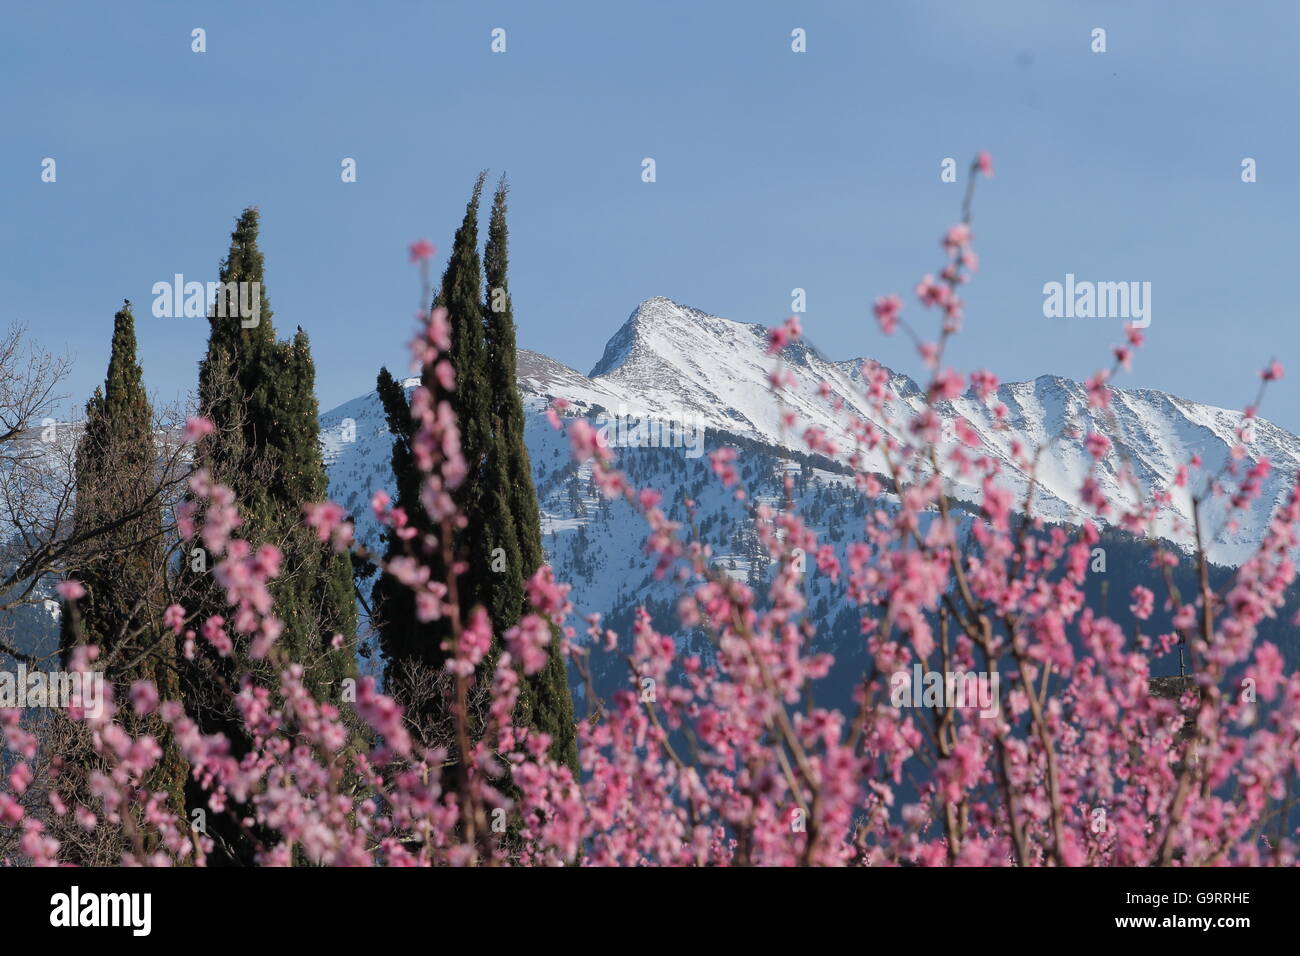 Mountains with snow and flowers Stock Photo